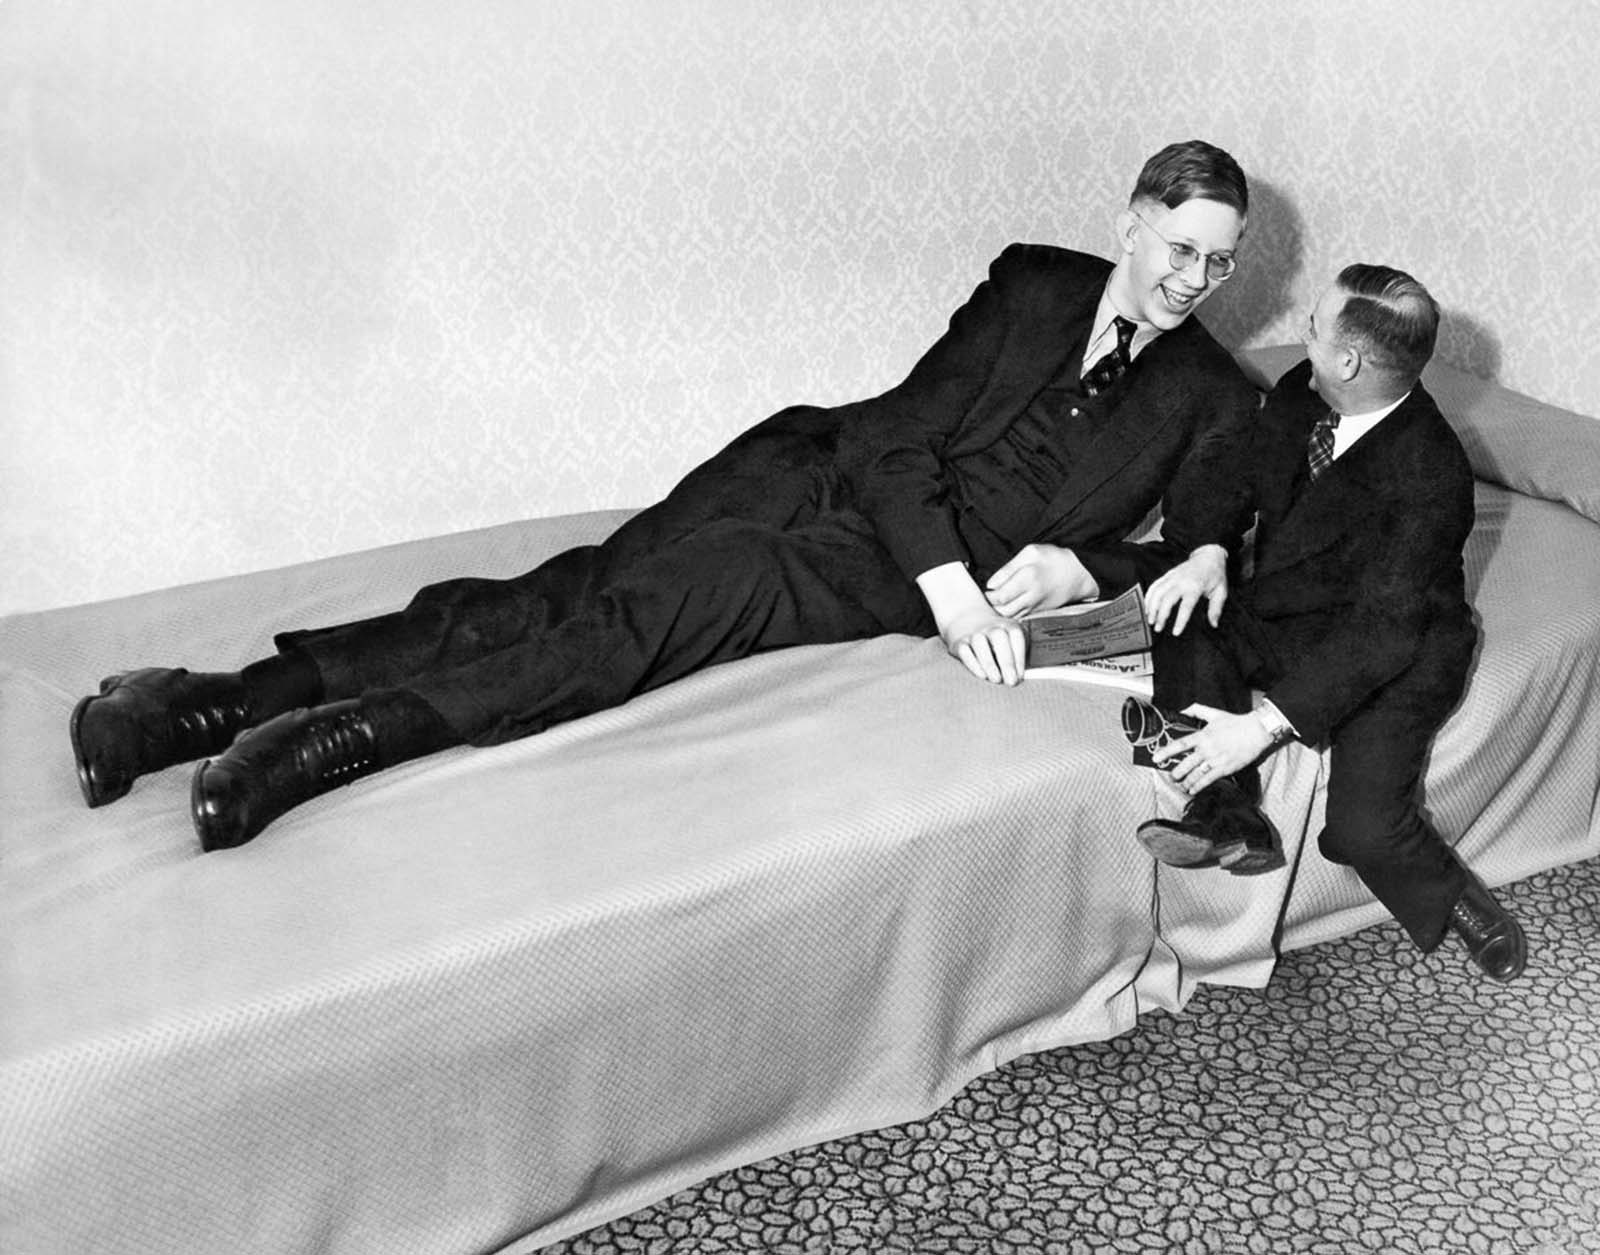 Wadlow chats with a friend after appearing at a charity event in Omaha, Nebraska, 1937.